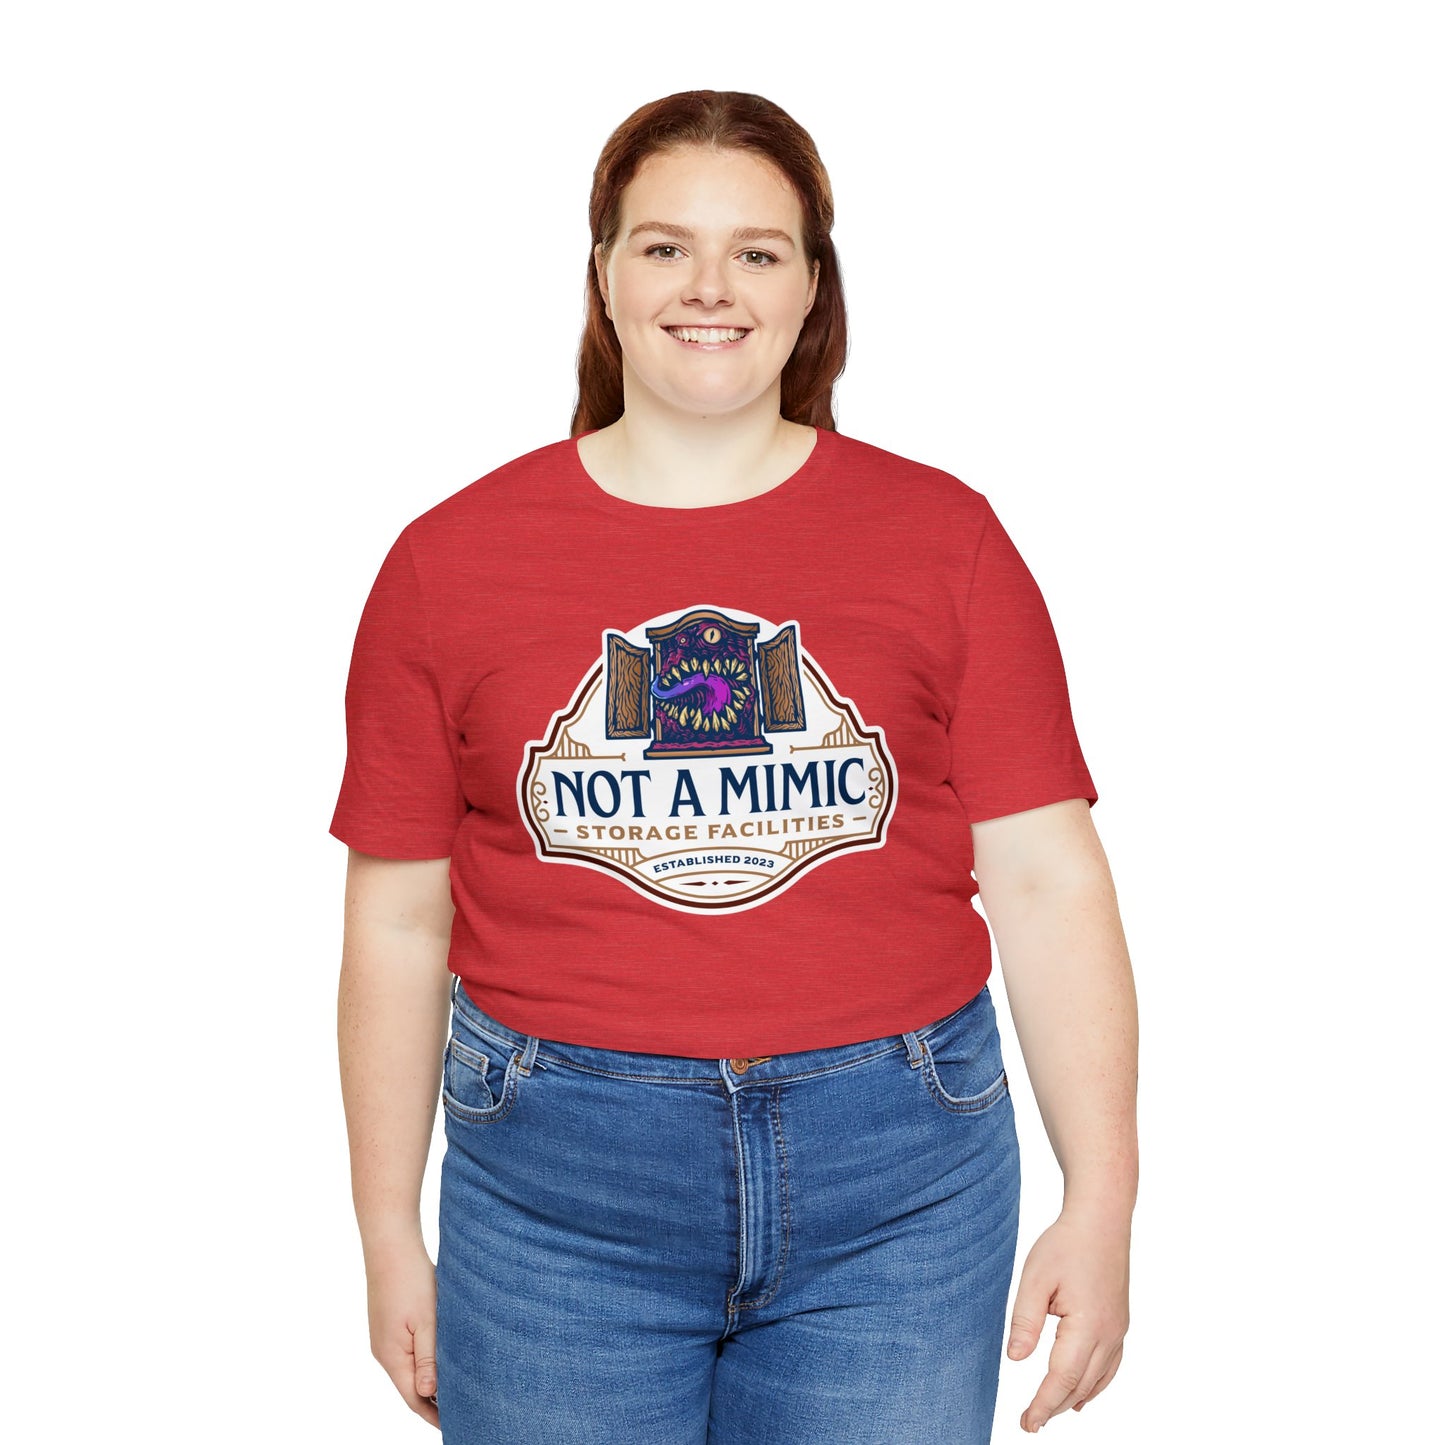 Not a Mimic Storage Facilities | Side Hustle Collection | Retail Fit Fantasy Geek Cotton T-shirt